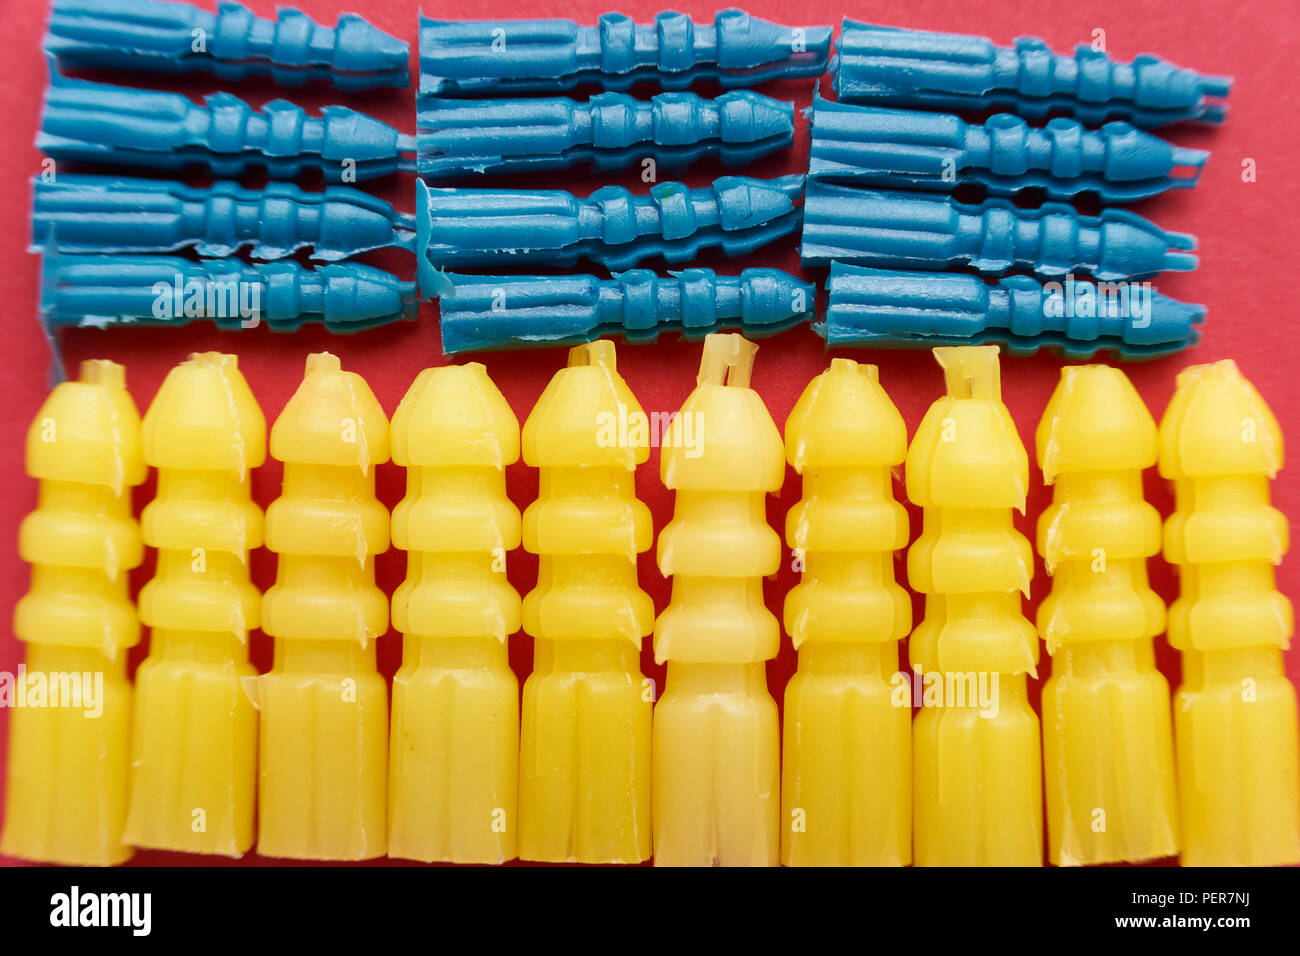 Yellow and blue plastic screw plugs, different sizes Stock Photo